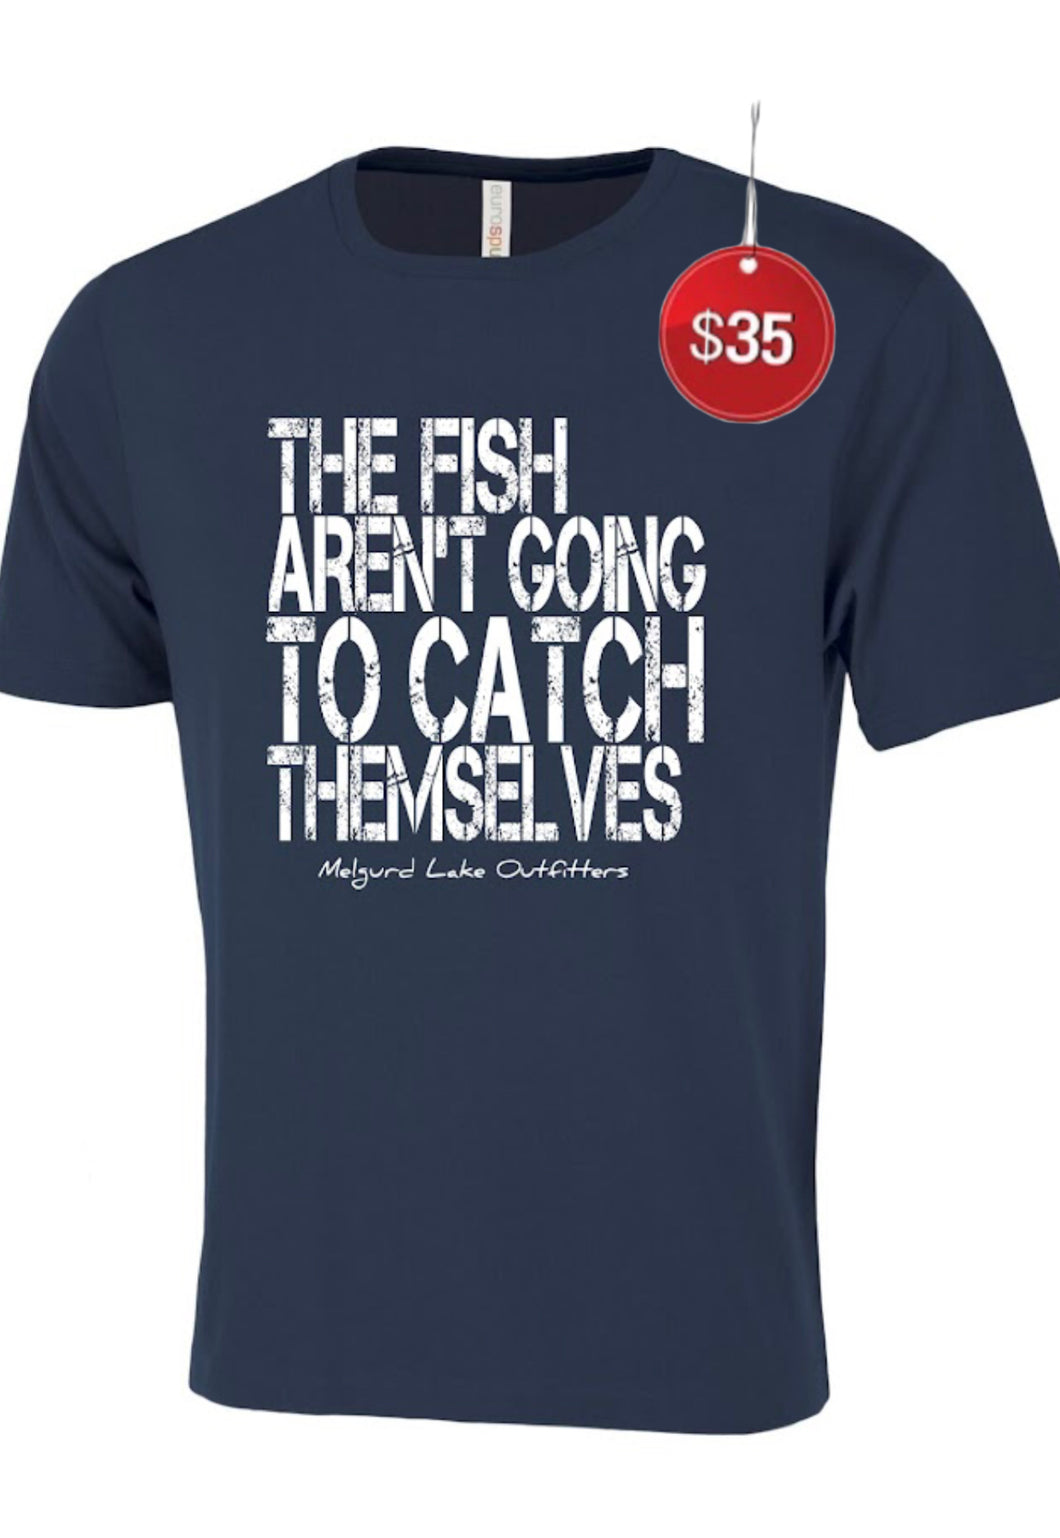 Limited Edition Catch Themselves Navy Tee  - $15 Discount taken at checkout